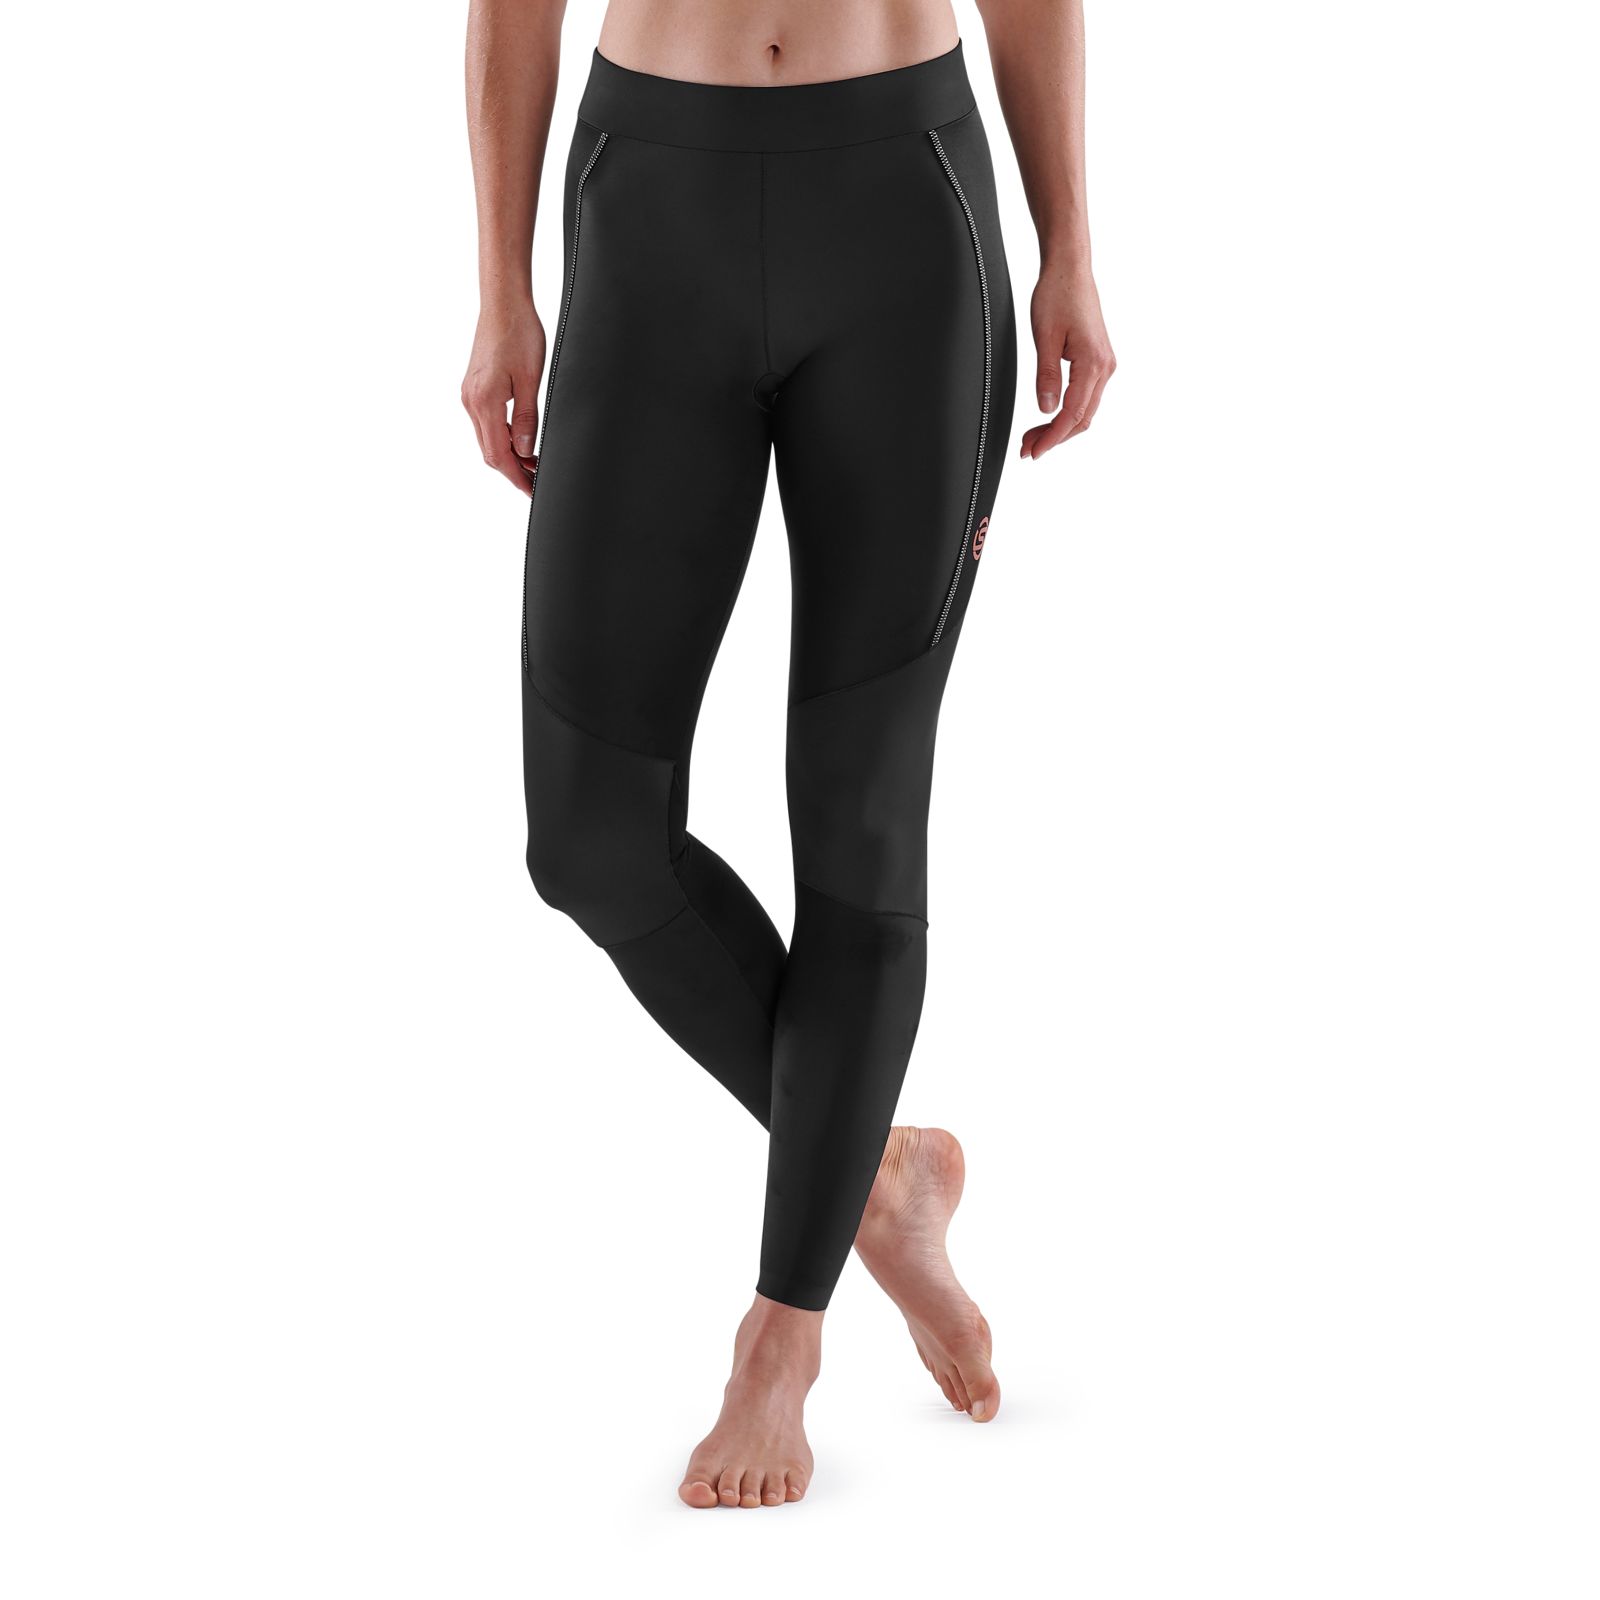 SKINS A200 WOMENS COMPRESSION 3/4 TIGHT - BLACK / BLUE, GREAT BARGAIN